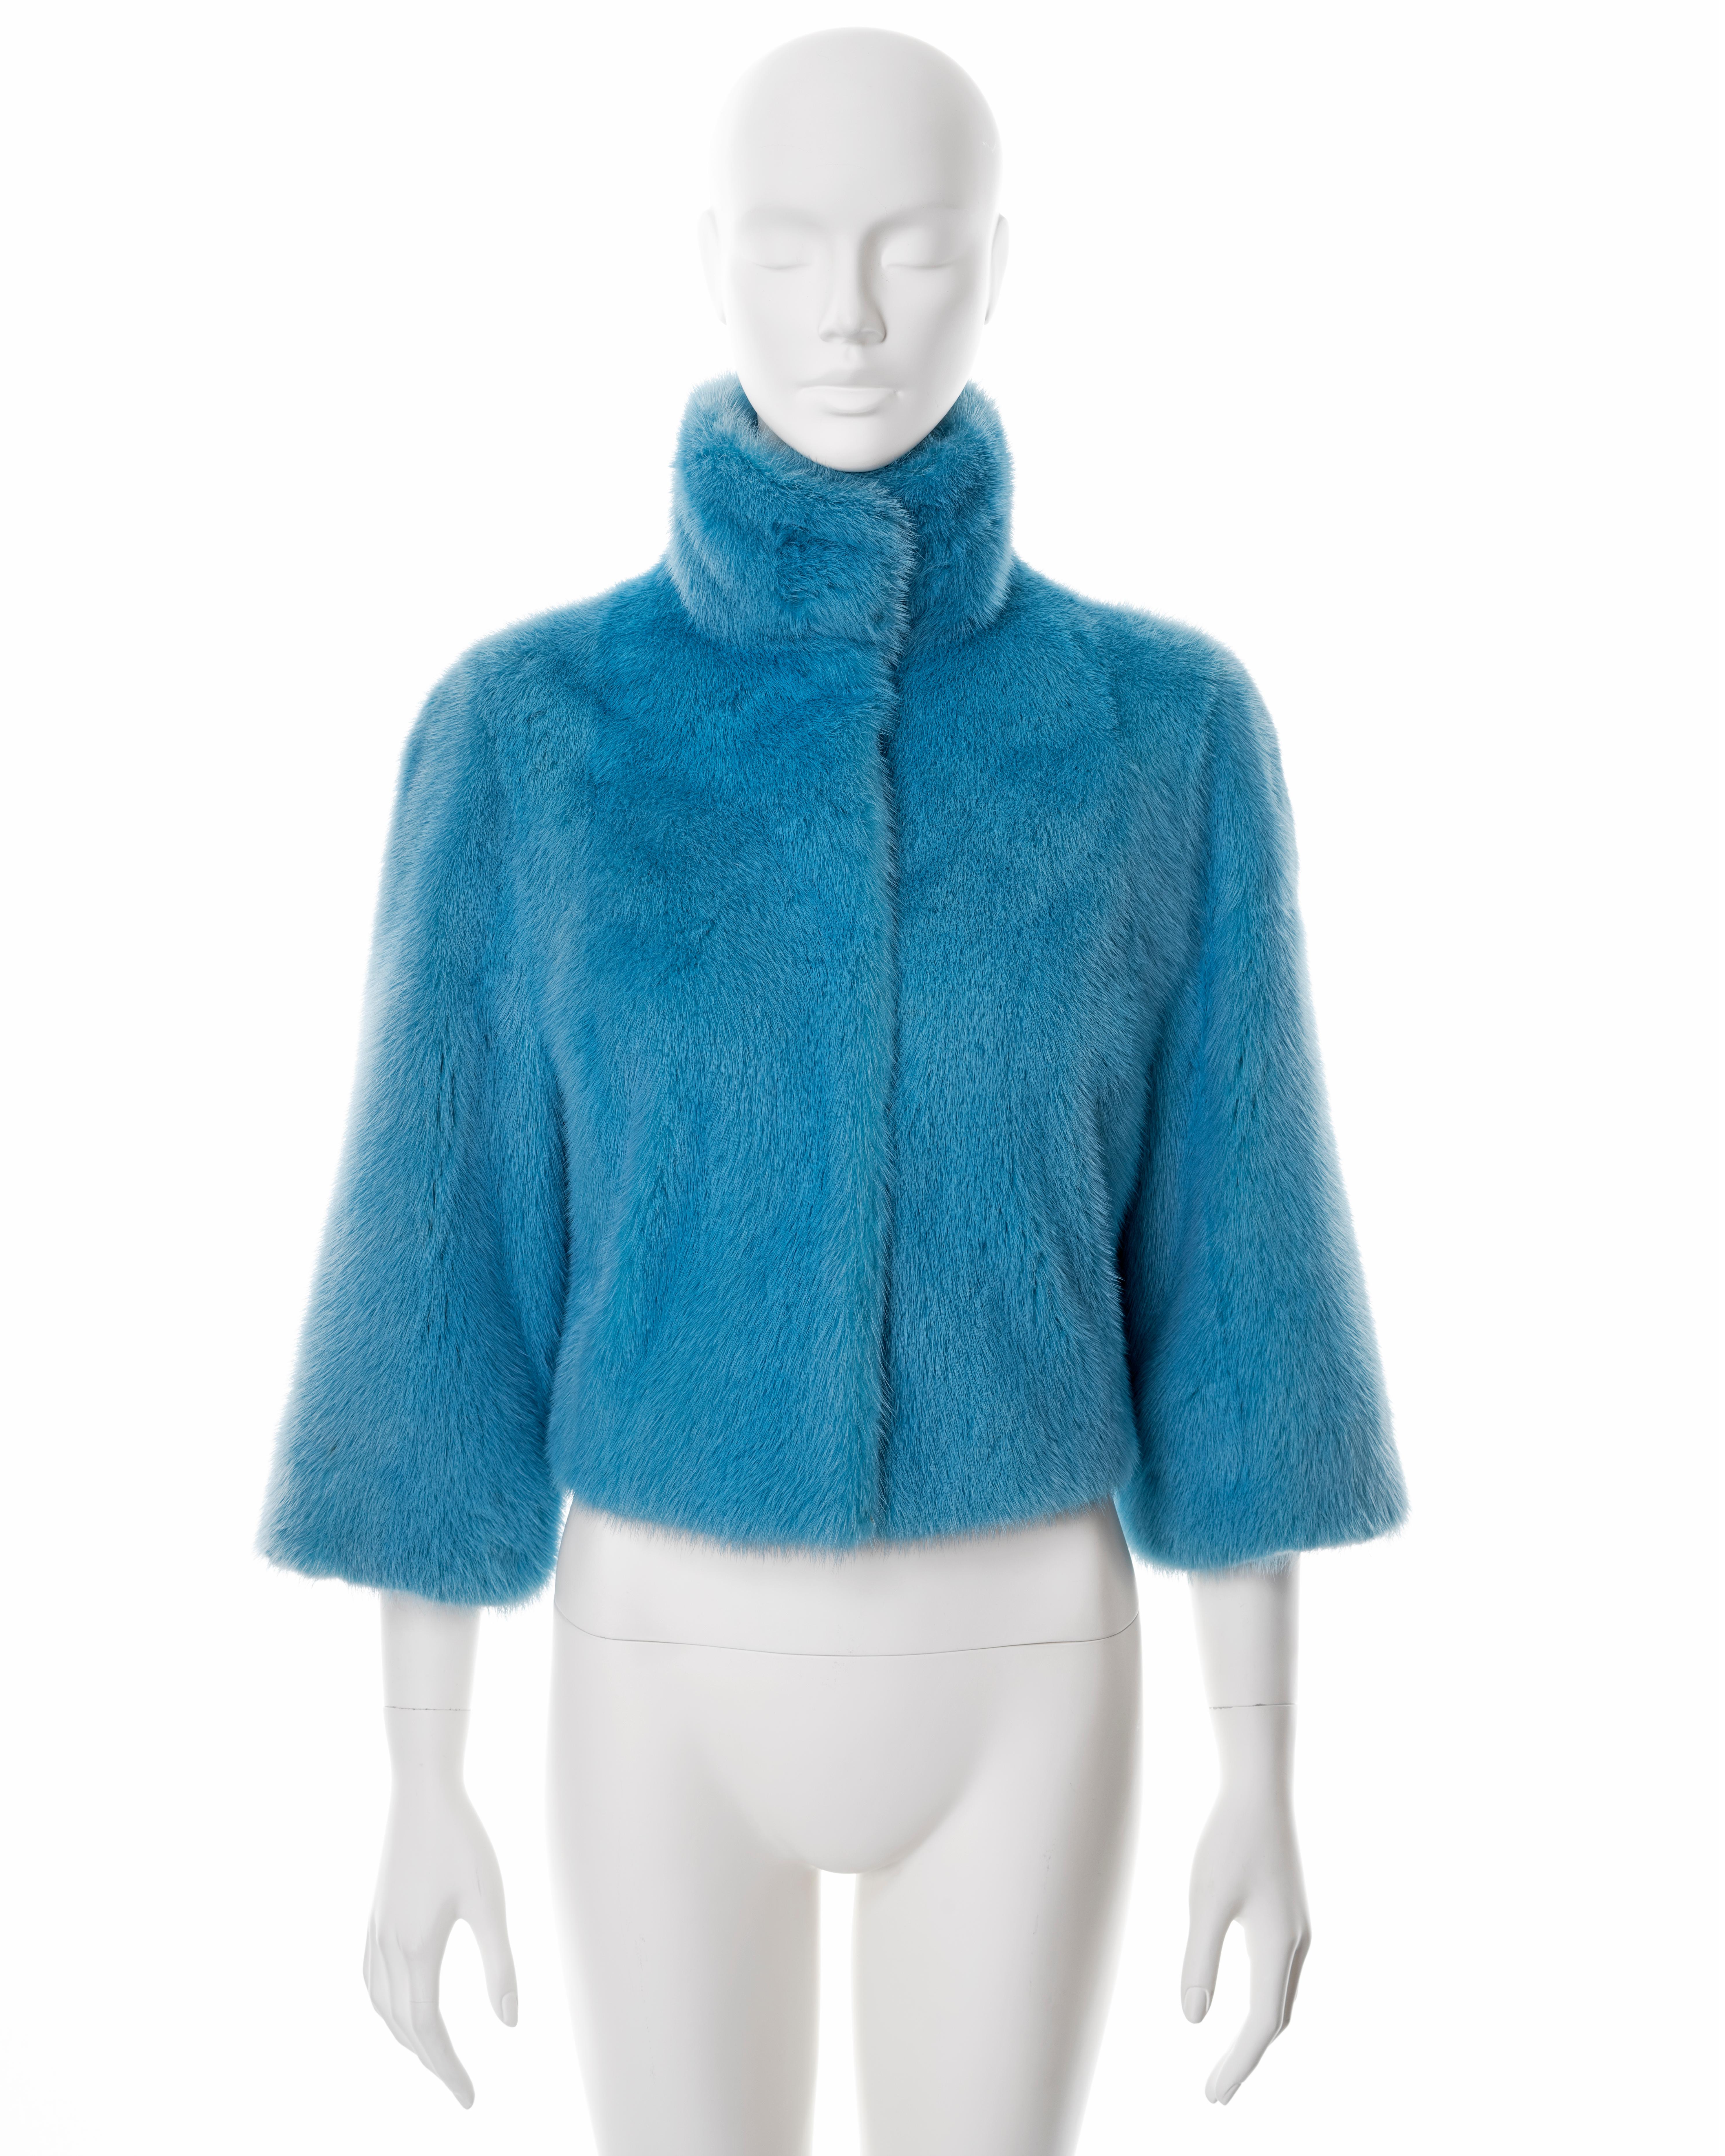 ▪ Dolce & Gabbana cropped fur jacket 
▪ Sold by One of a Kind Archive
▪ Fall-Winter 1999
▪ Constructed from blue-dyed mink fur 
▪ High standing collar 
▪ Press-stud buttons
▪ Cropped sleeves
▪ Black silk lining
▪ IT 44 - FR 40 - UK 12 - US 8
▪ Made